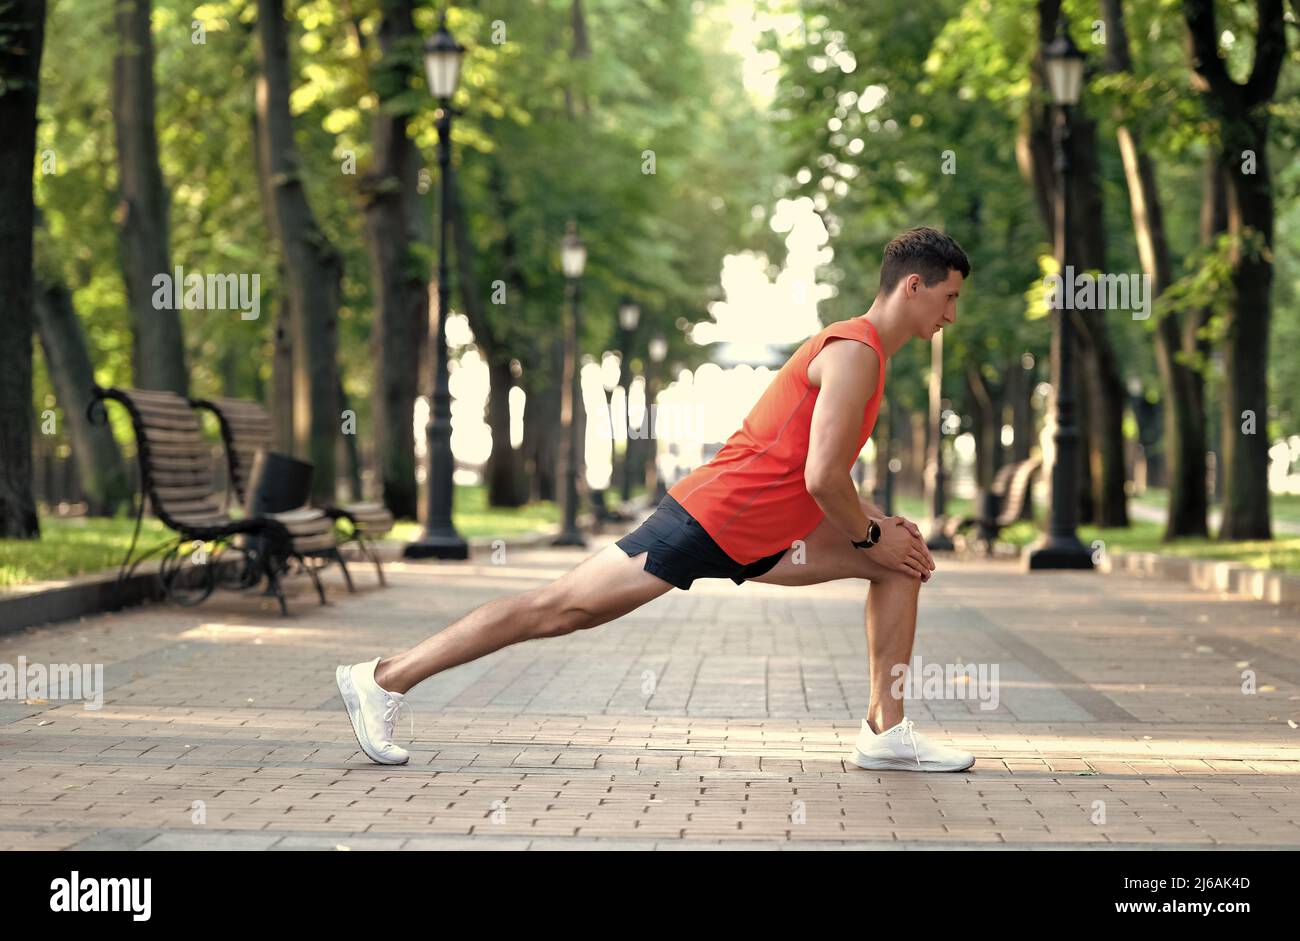 Get warmed up before workout. Man take warmup. Sportsman hold lunge position. Warmup exercises Stock Photo